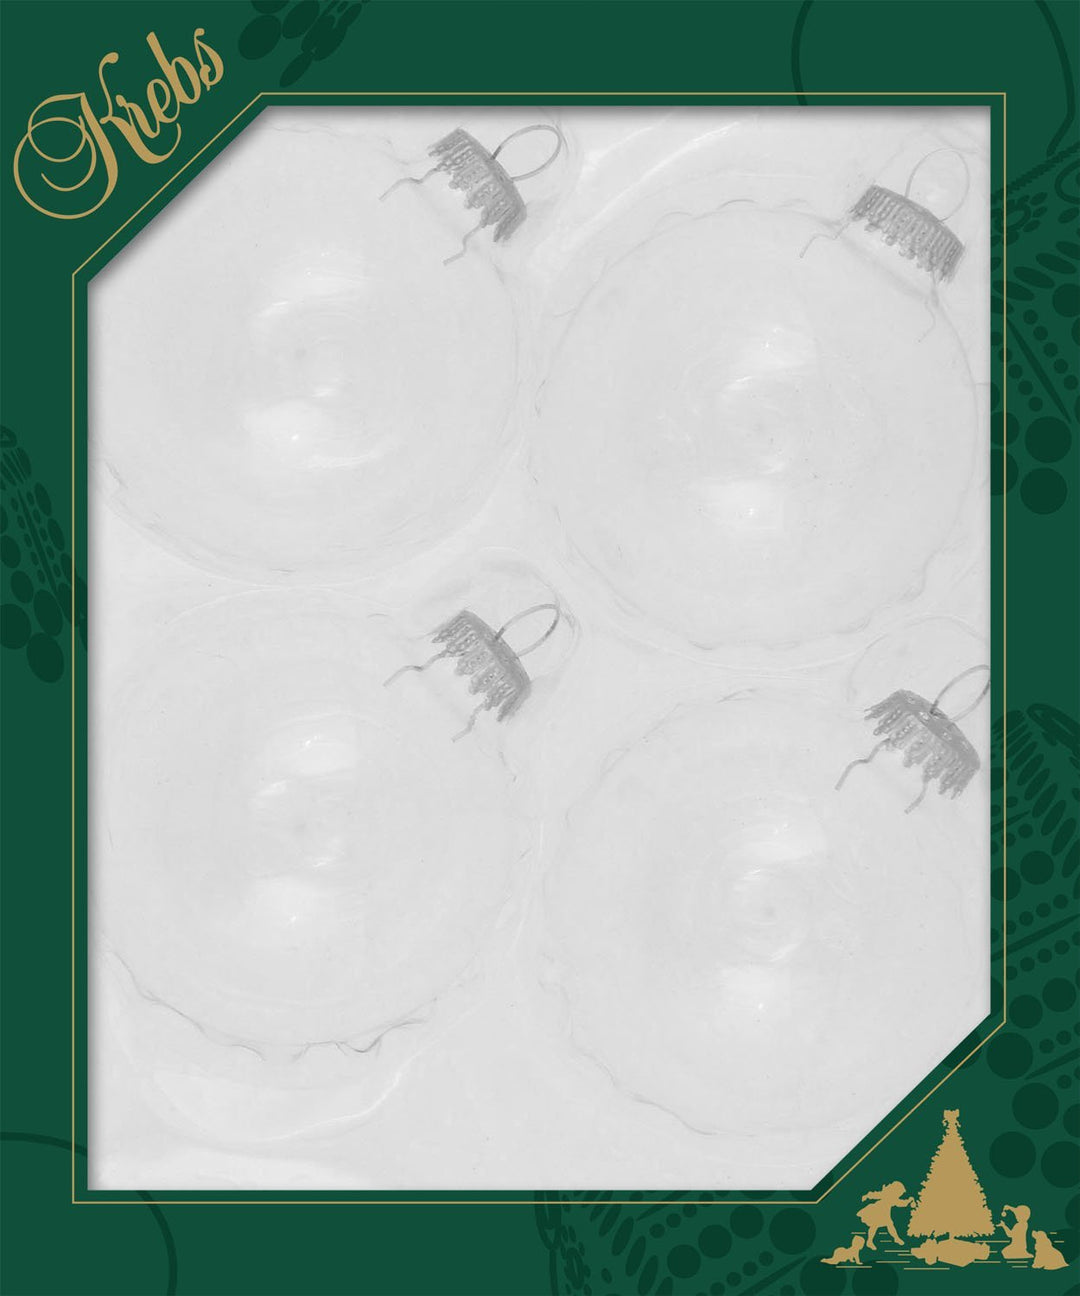 Glass Christmas Tree Ornaments - 80mm / 3.25" [4 Pieces] Designer Balls from Christmas By Krebs Seamless Hanging Holiday Decor (Clear)